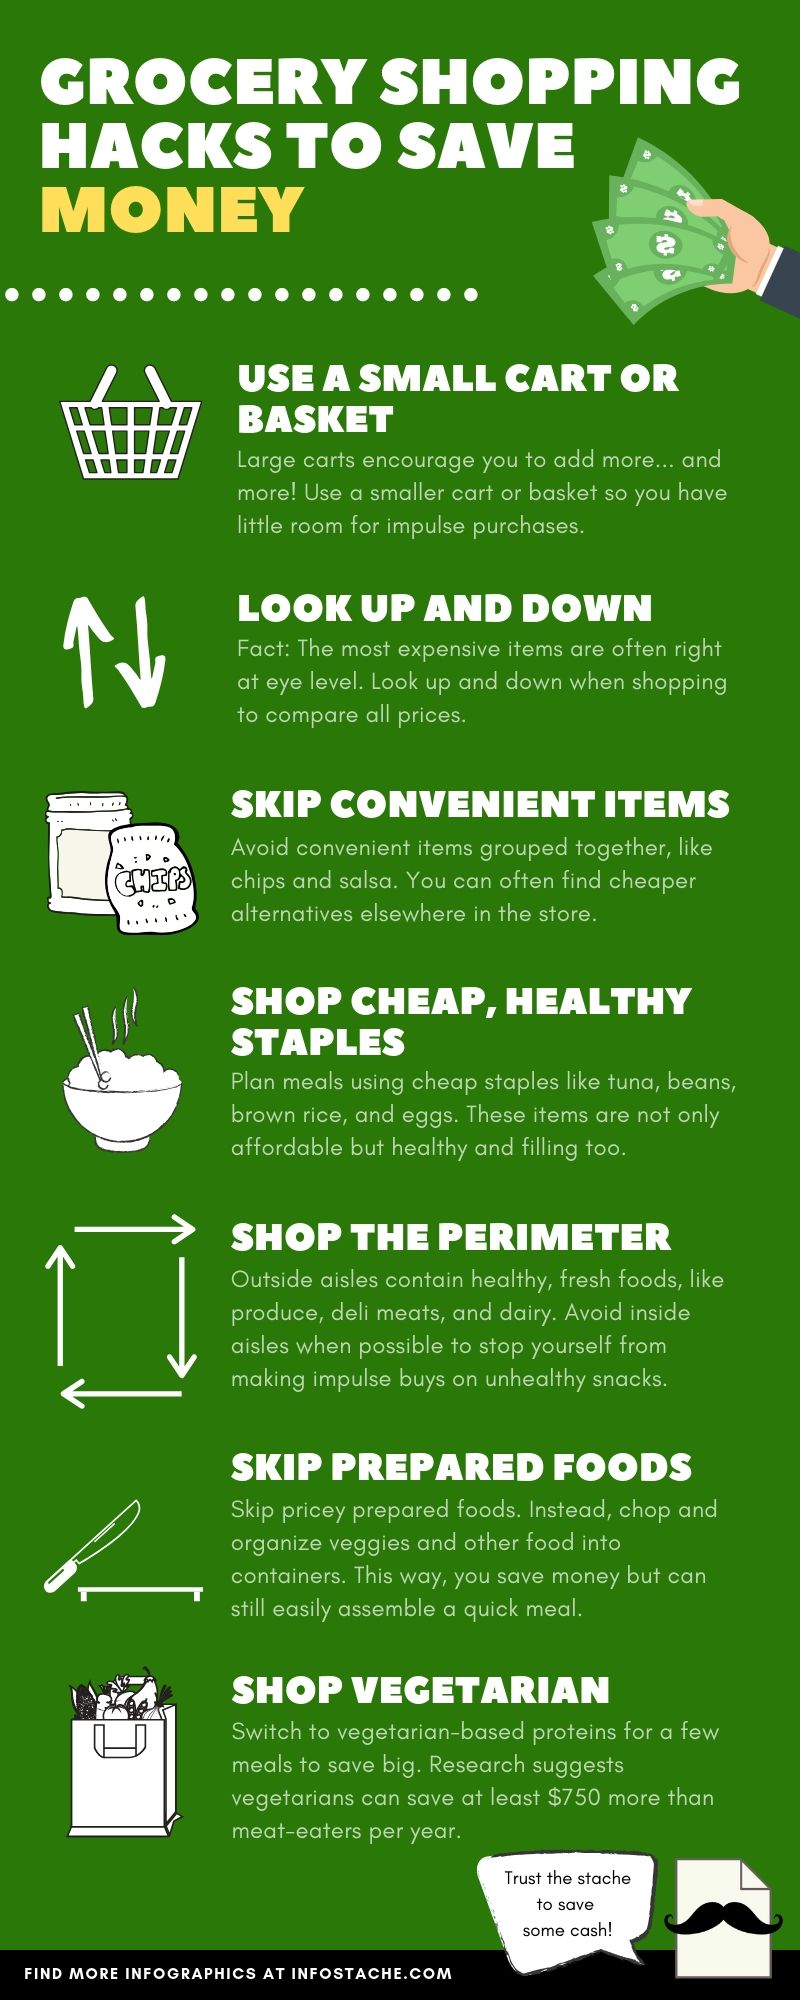 Grocery Shopping Hacks to Save Money